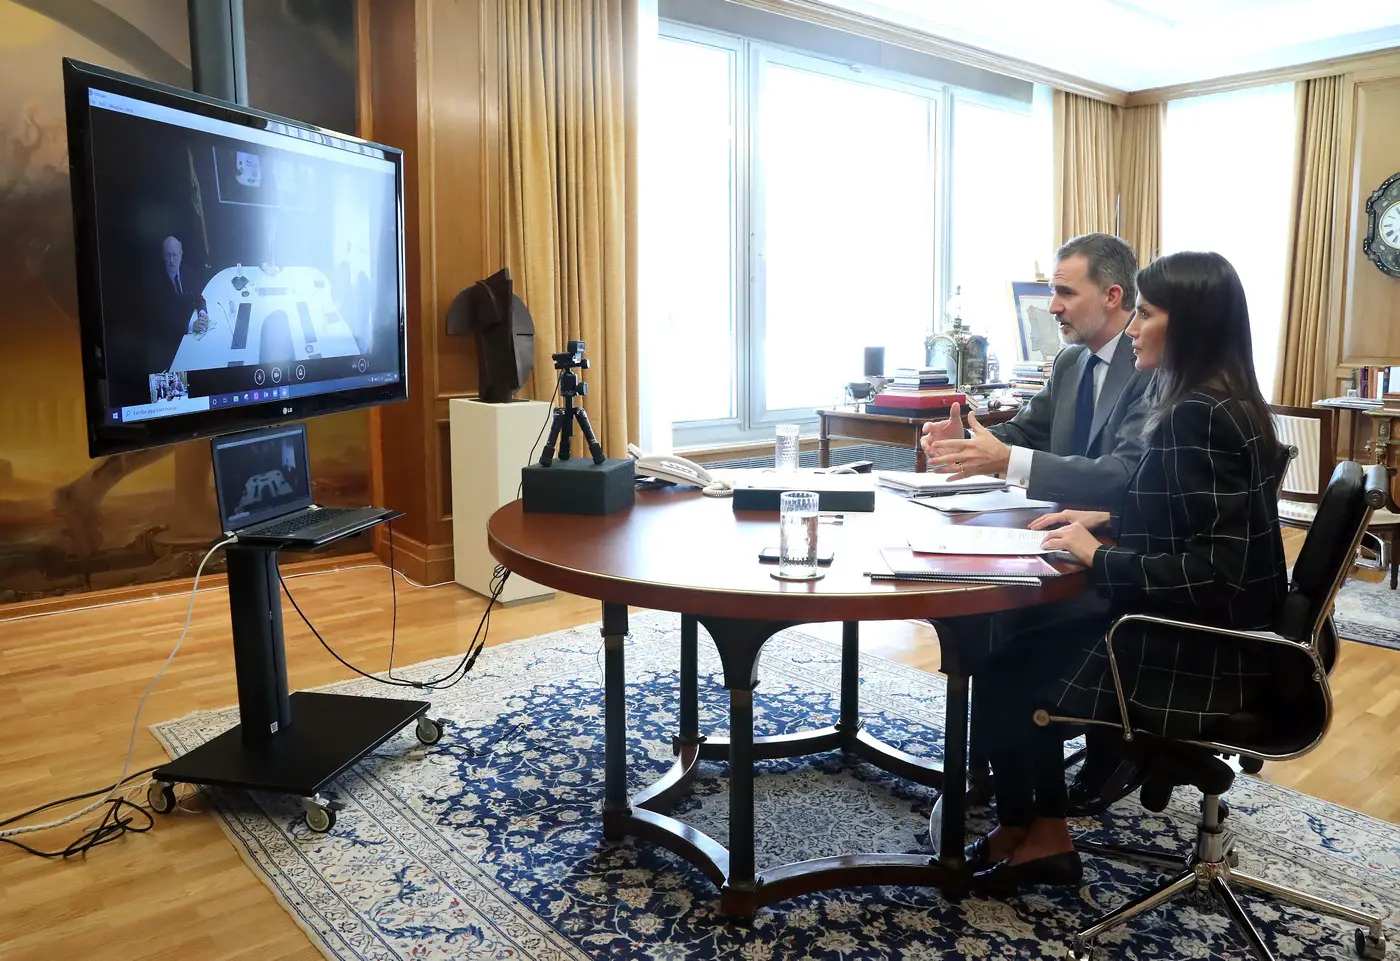 Felipe and Letizia talked to the representatives of the Aviation authorities - Spanish Airports and Air Navigations(AENA)